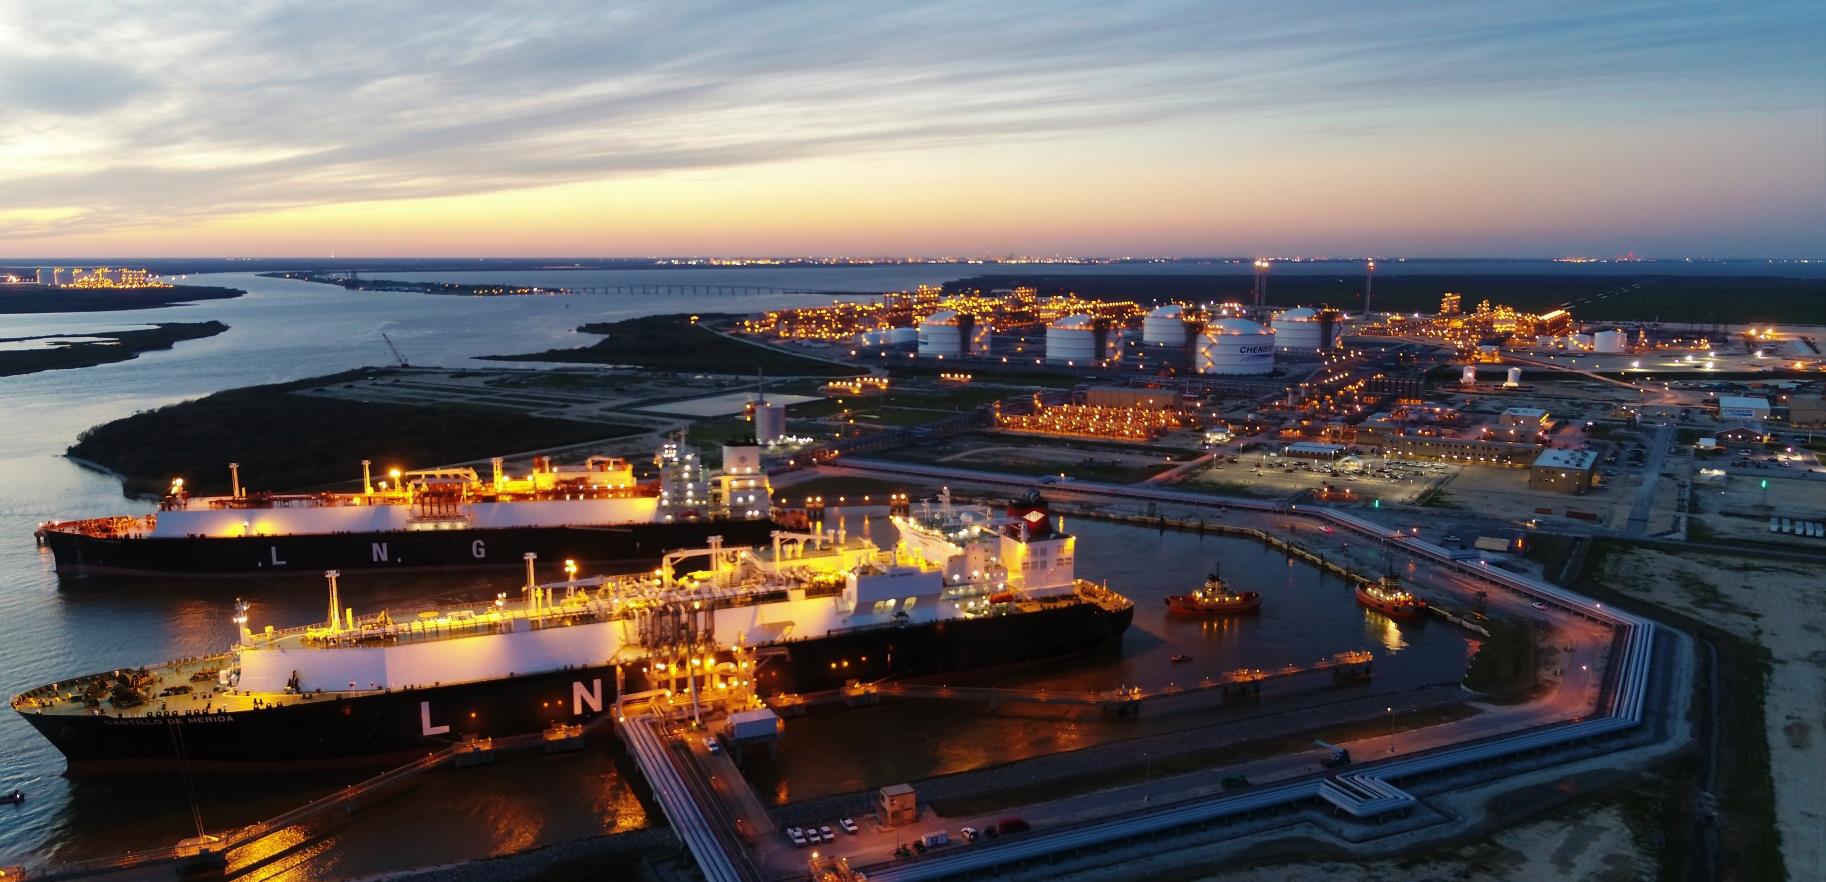 Cheniere LNG used for GHG life cycle assesment study